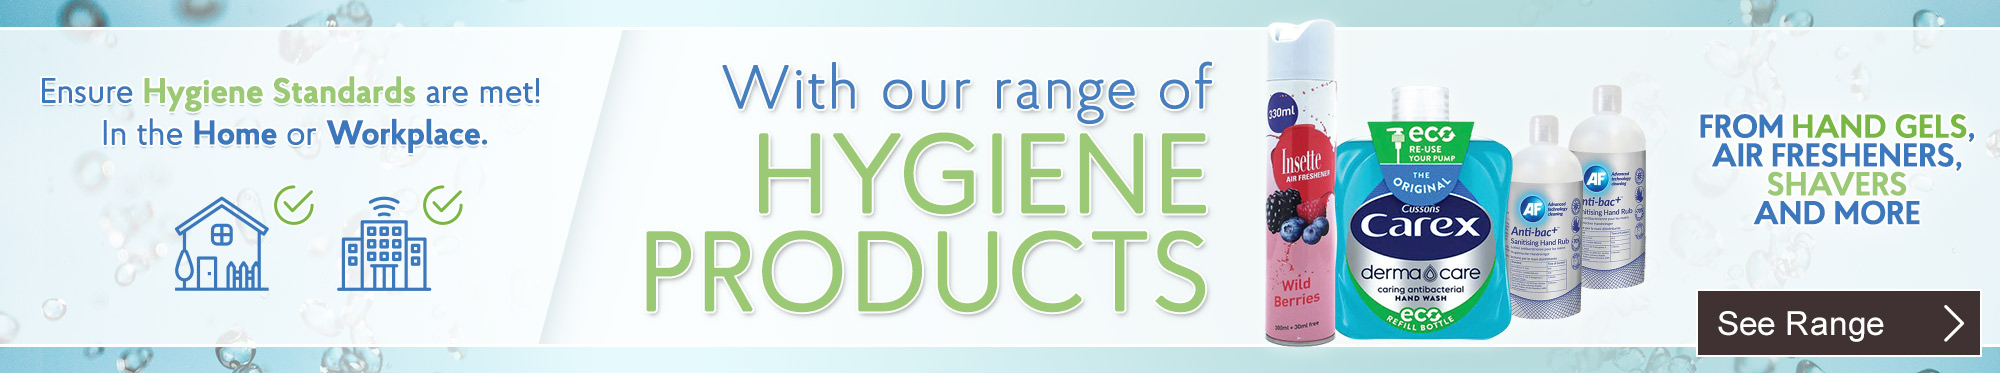 Ensure Hygiene Standards Are Met with The Range of Hygiene Products